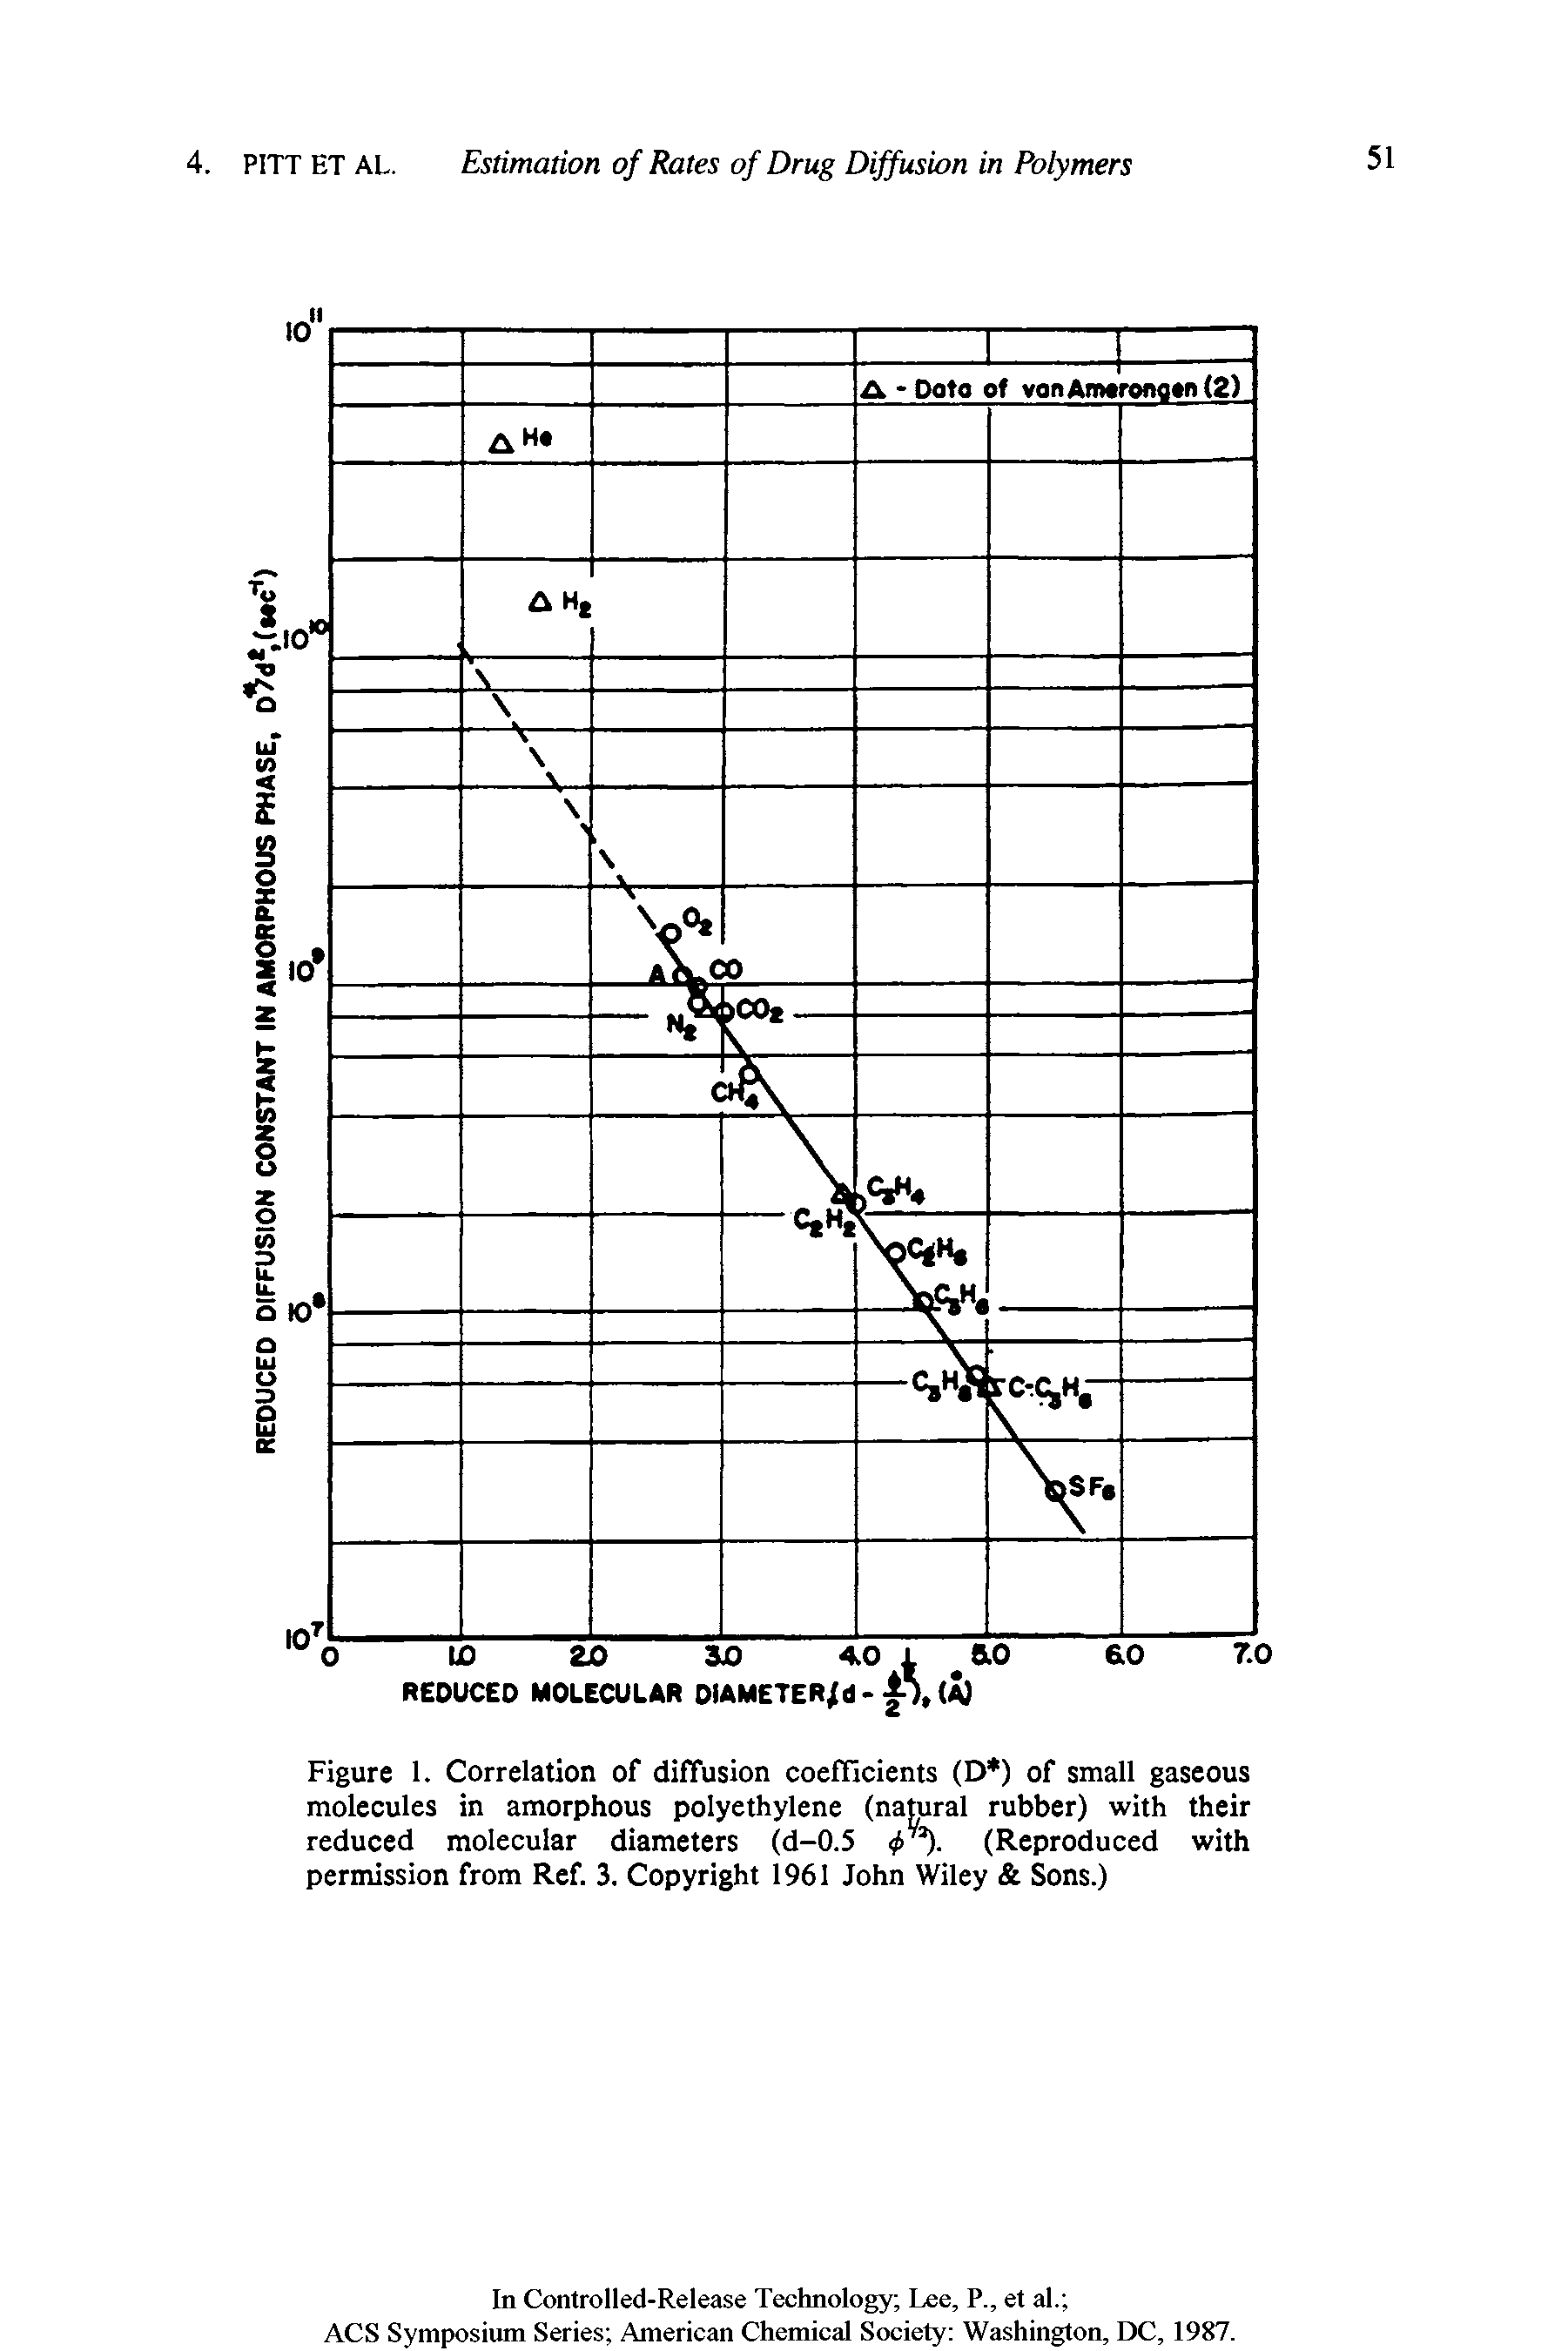 Figure 1. Correlation of diffusion coefficients (D ) of small gaseous molecules in amorphous polyethylene (natural rubber) with their reduced molecular diameters (d-0.5 <j> (Reproduced with permission from Ref. 3. Copyright 1961 John Wiley Sons.)...